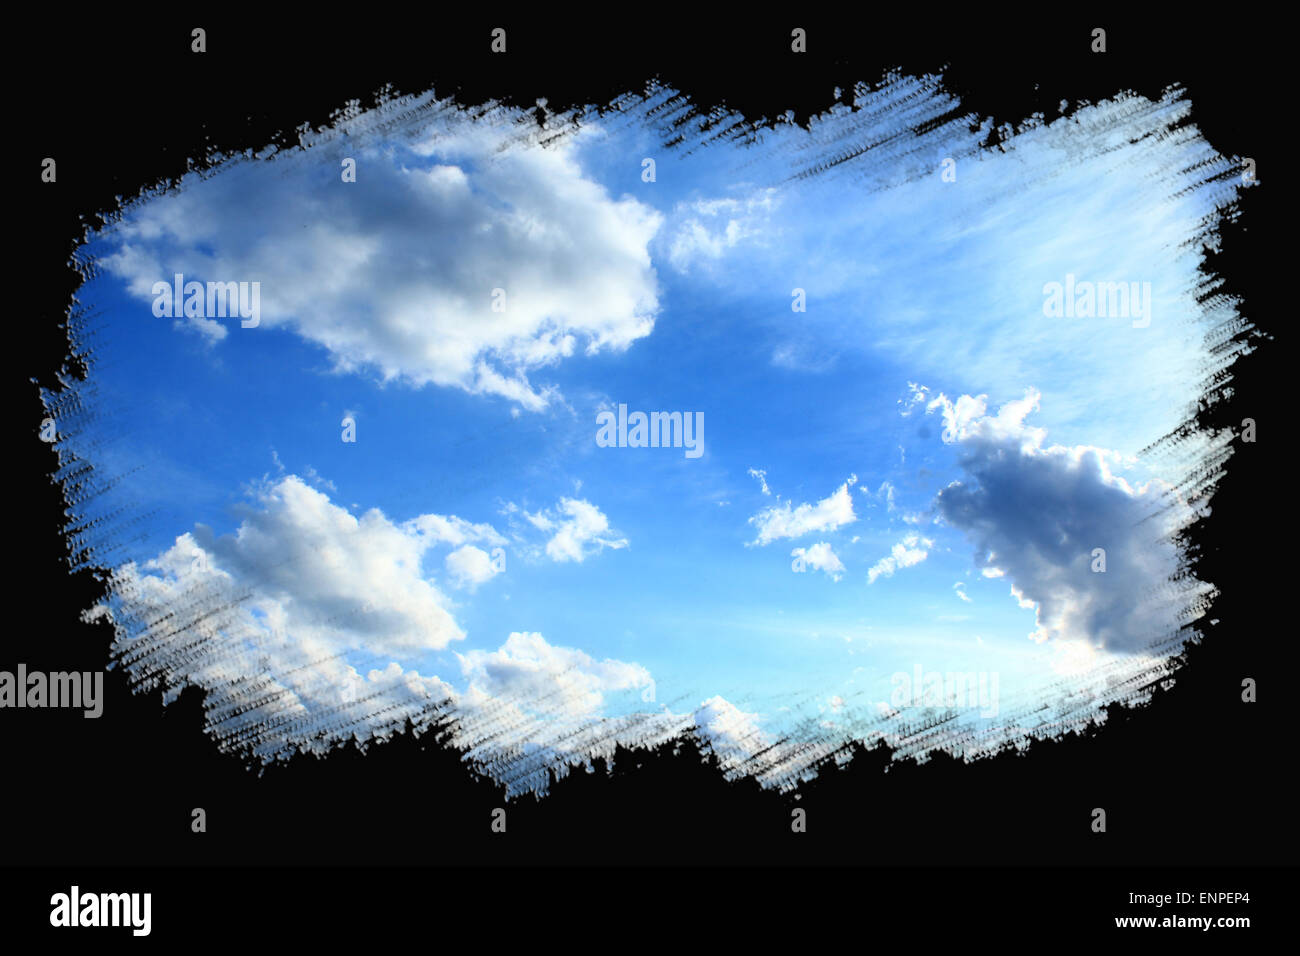 beautiful summer sky with bright sky in the painted black frame Stock Photo